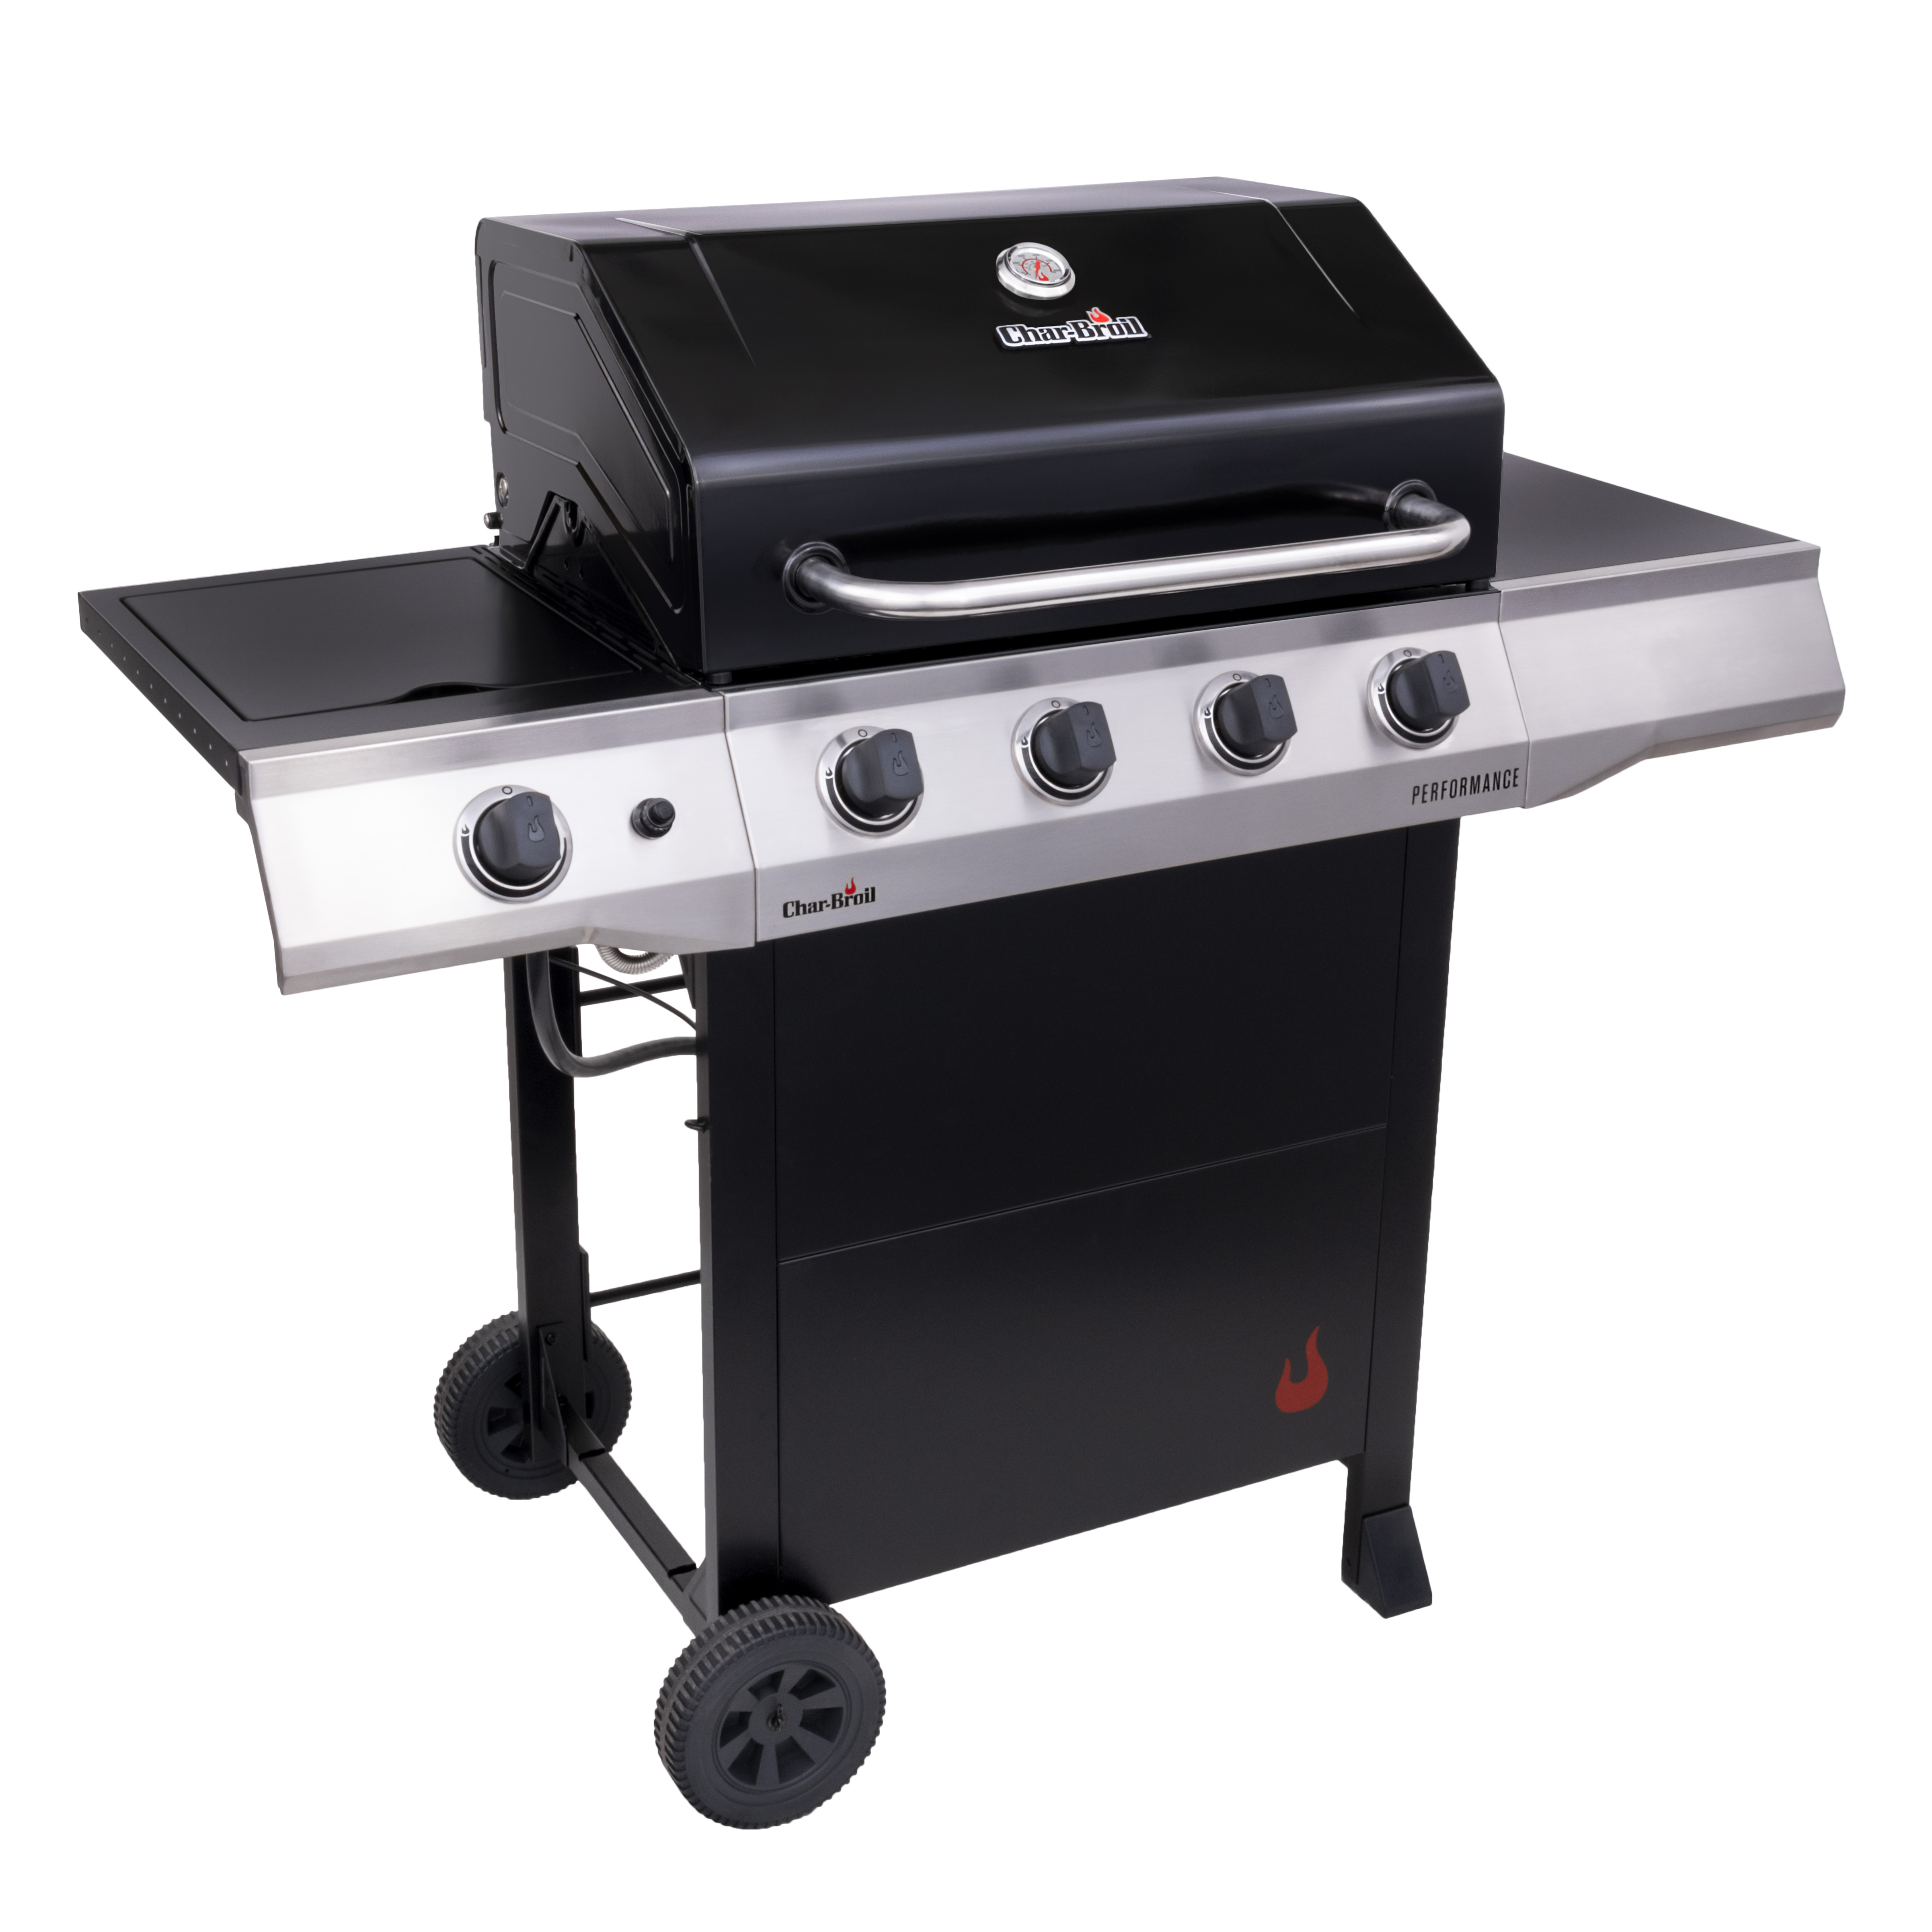 Char-Broil Performance 4-Burner Liquid Propane, Cart-Style Outdoor Gas Grill- Black - image 3 of 9